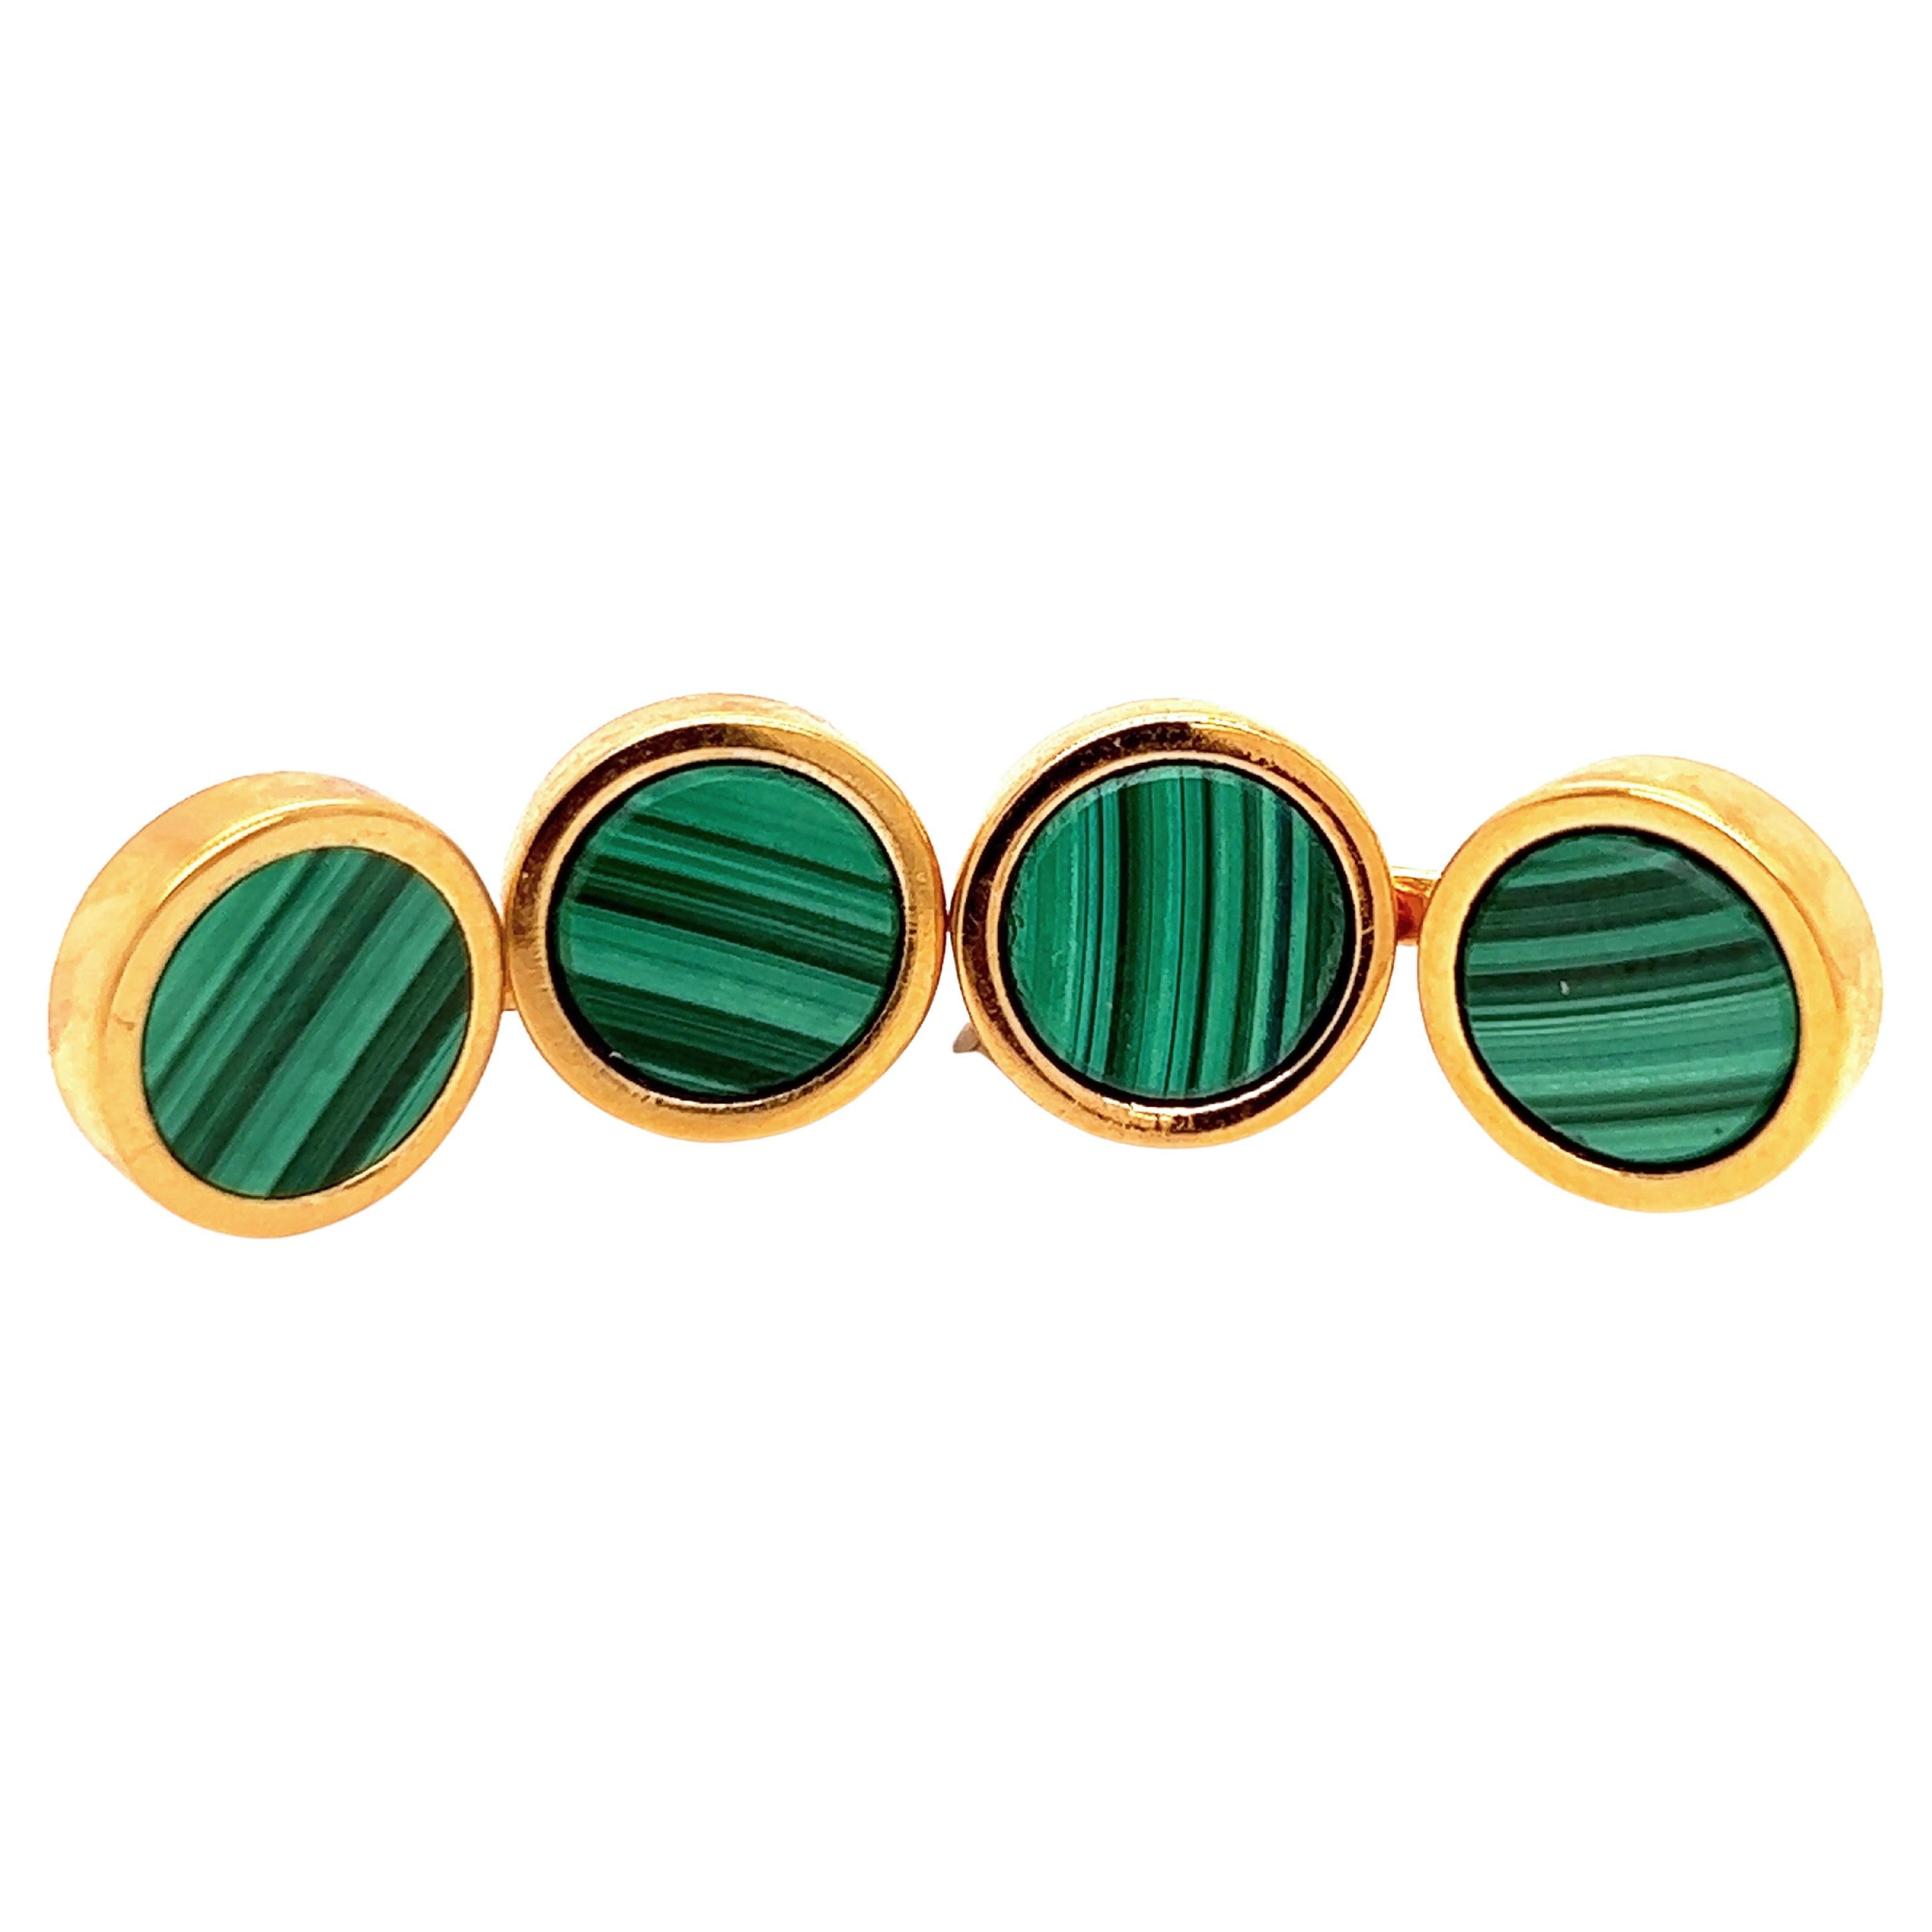 Natural Malachite Disk Round Shaped Sterling Silver Gold Plated Cufflinks